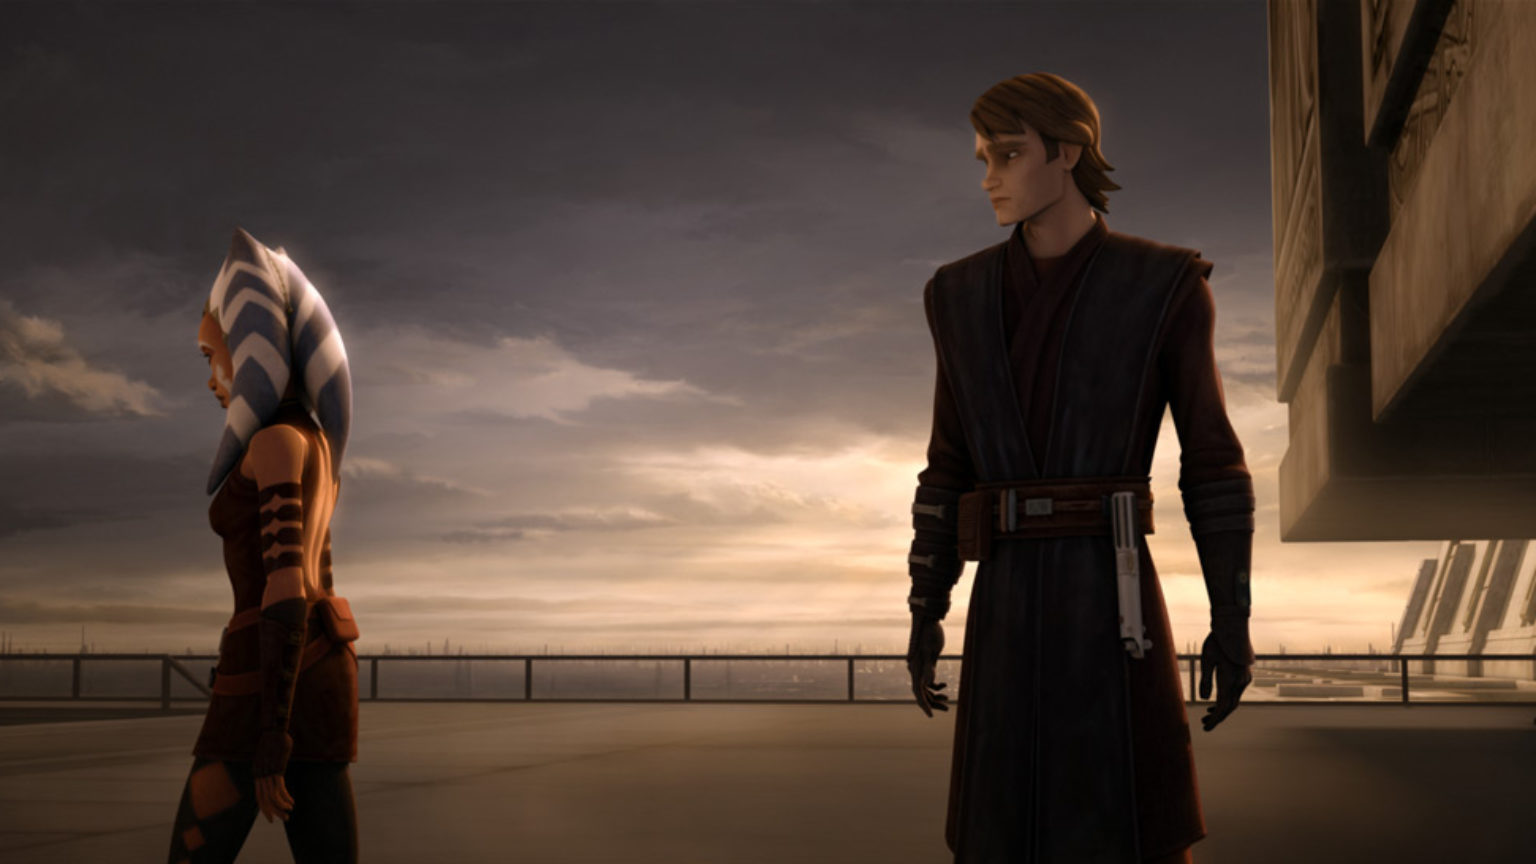 A still from the animated series Star Wars: The Clone Wars. The characters Anakin and Ahsoka stand next to each other. Ahsoka walks away from Anakin, both have somber looks on their faces. The sky is dark and moody behind them.